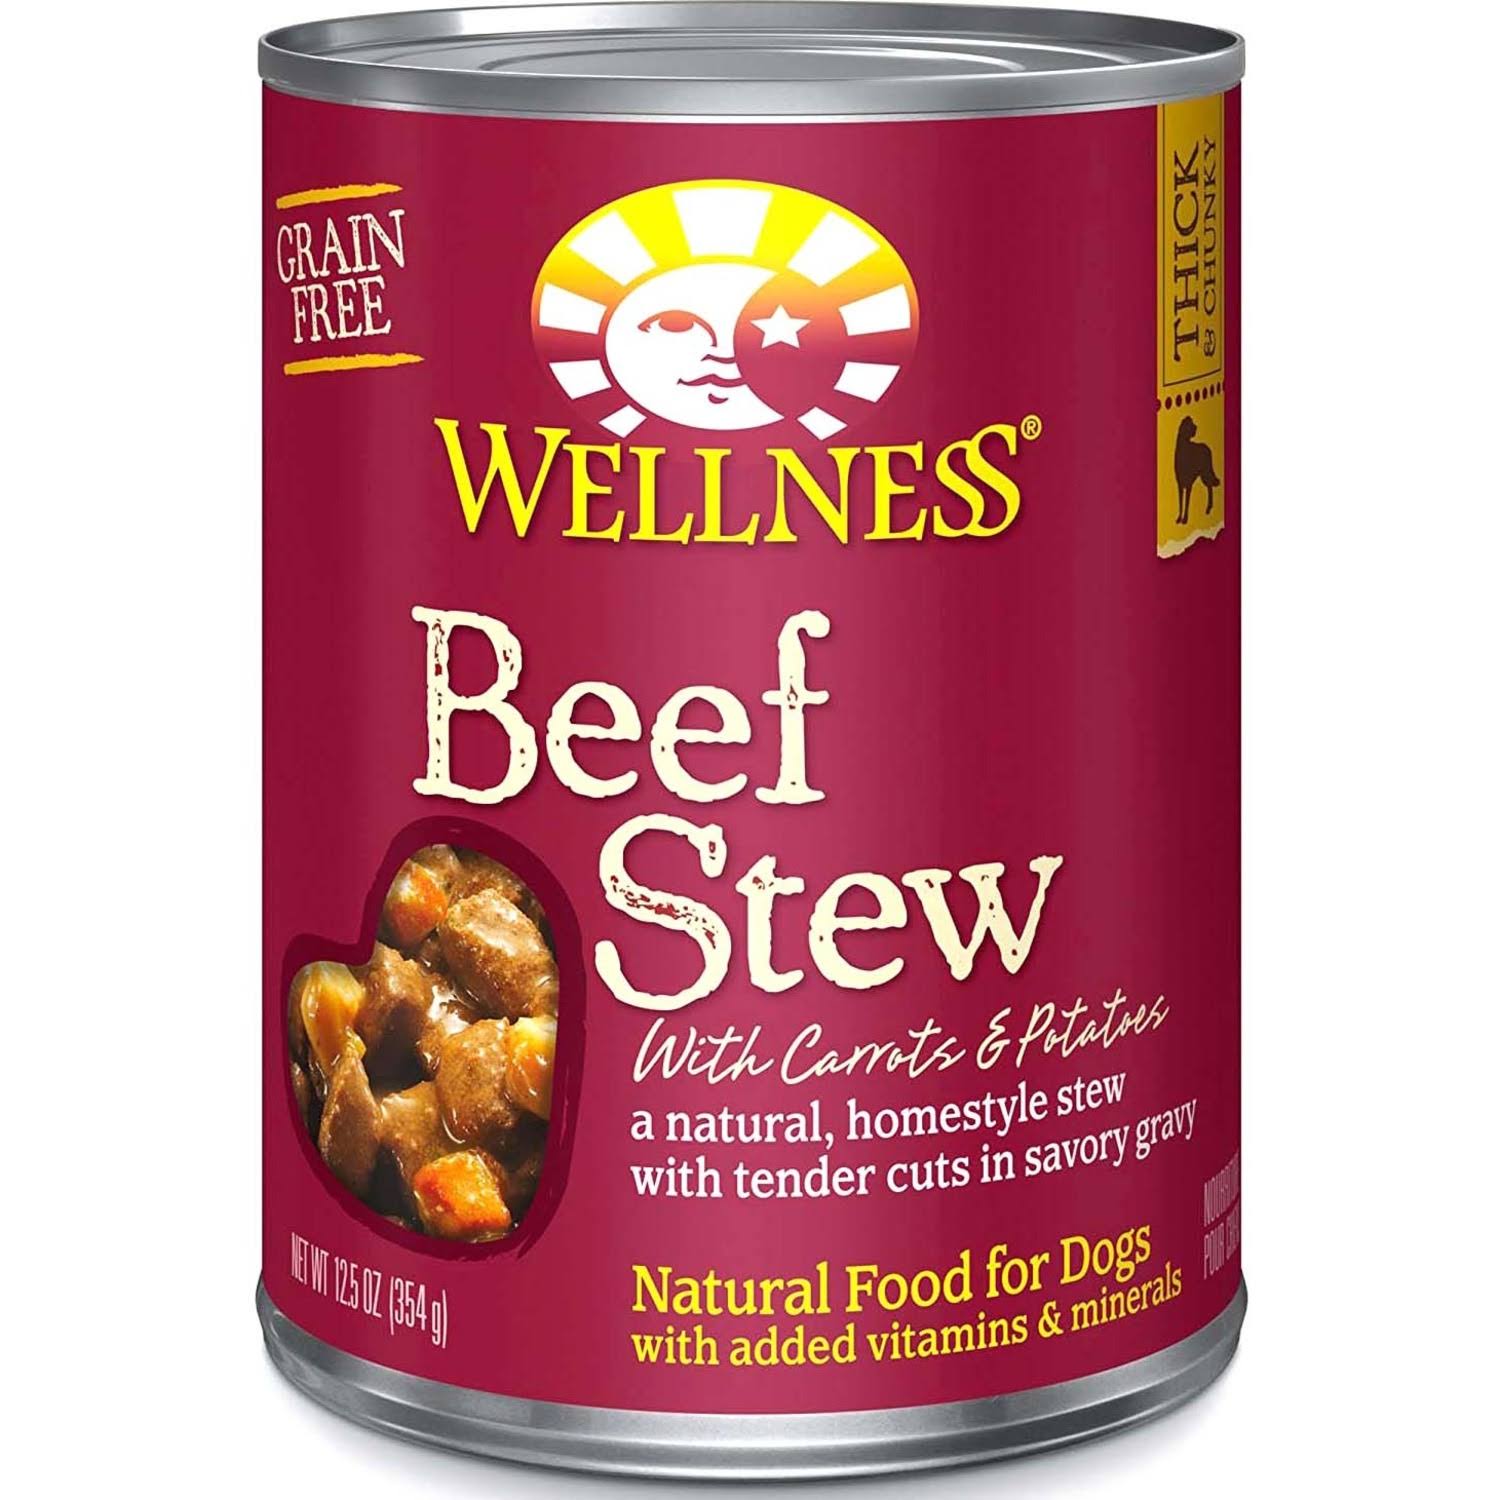 Wellness Natural Grain Free Wet Canned Dog Food - Beef Stew with Carrots & Potatoes, 12.5oz